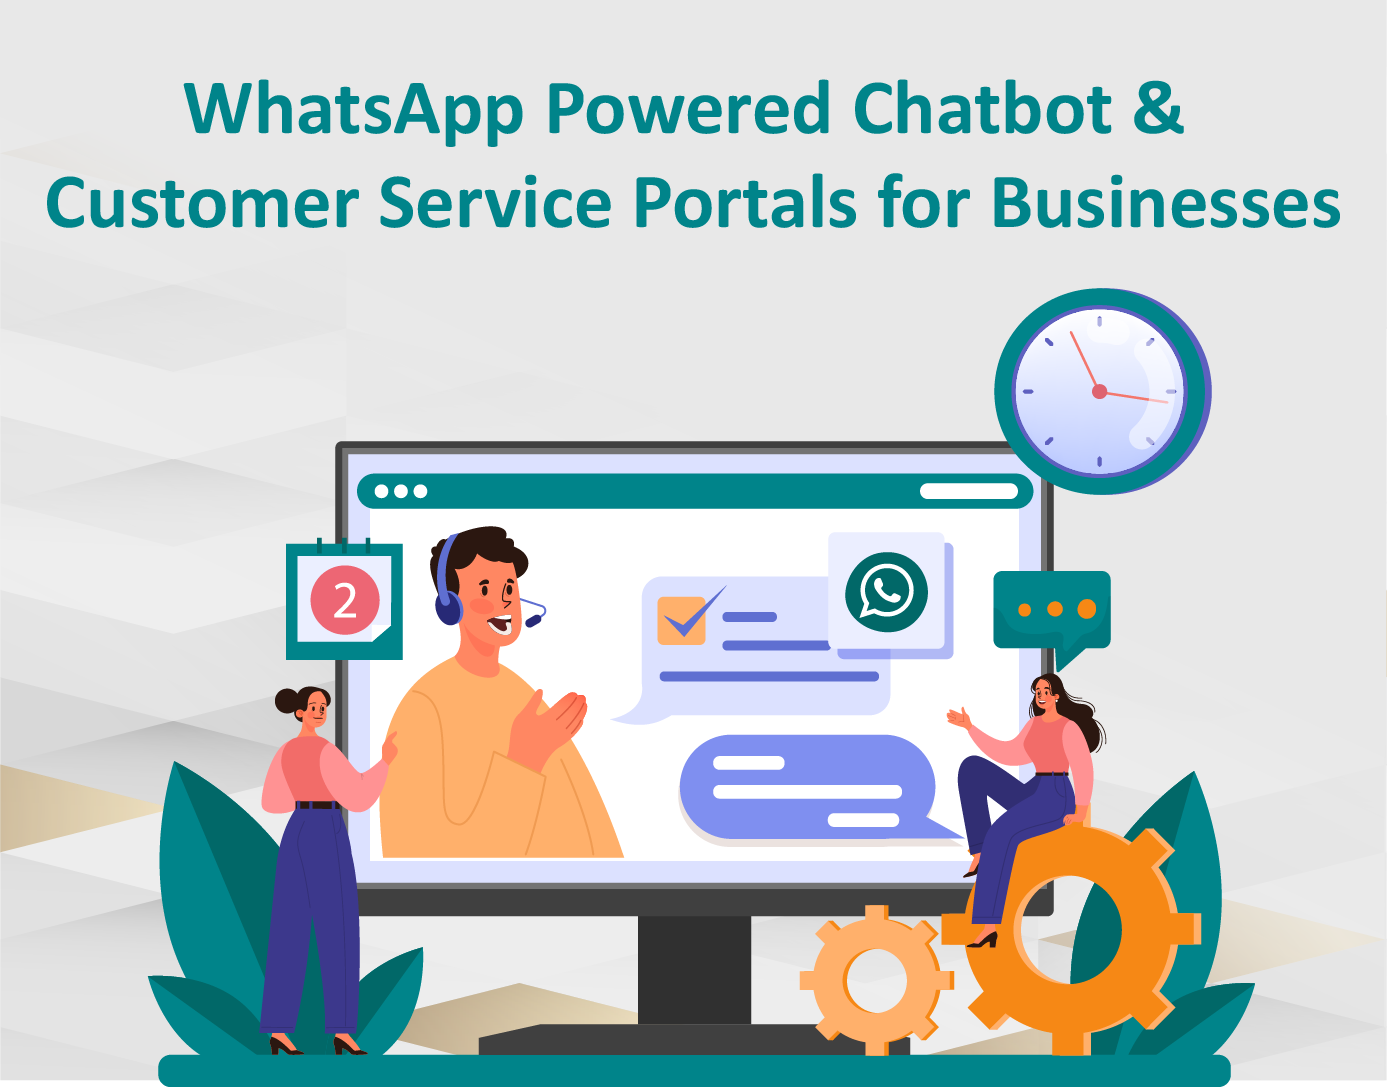 WhatsApp-powered chatbot and customer service portals empowering businesses, providing efficient and personalized customer support